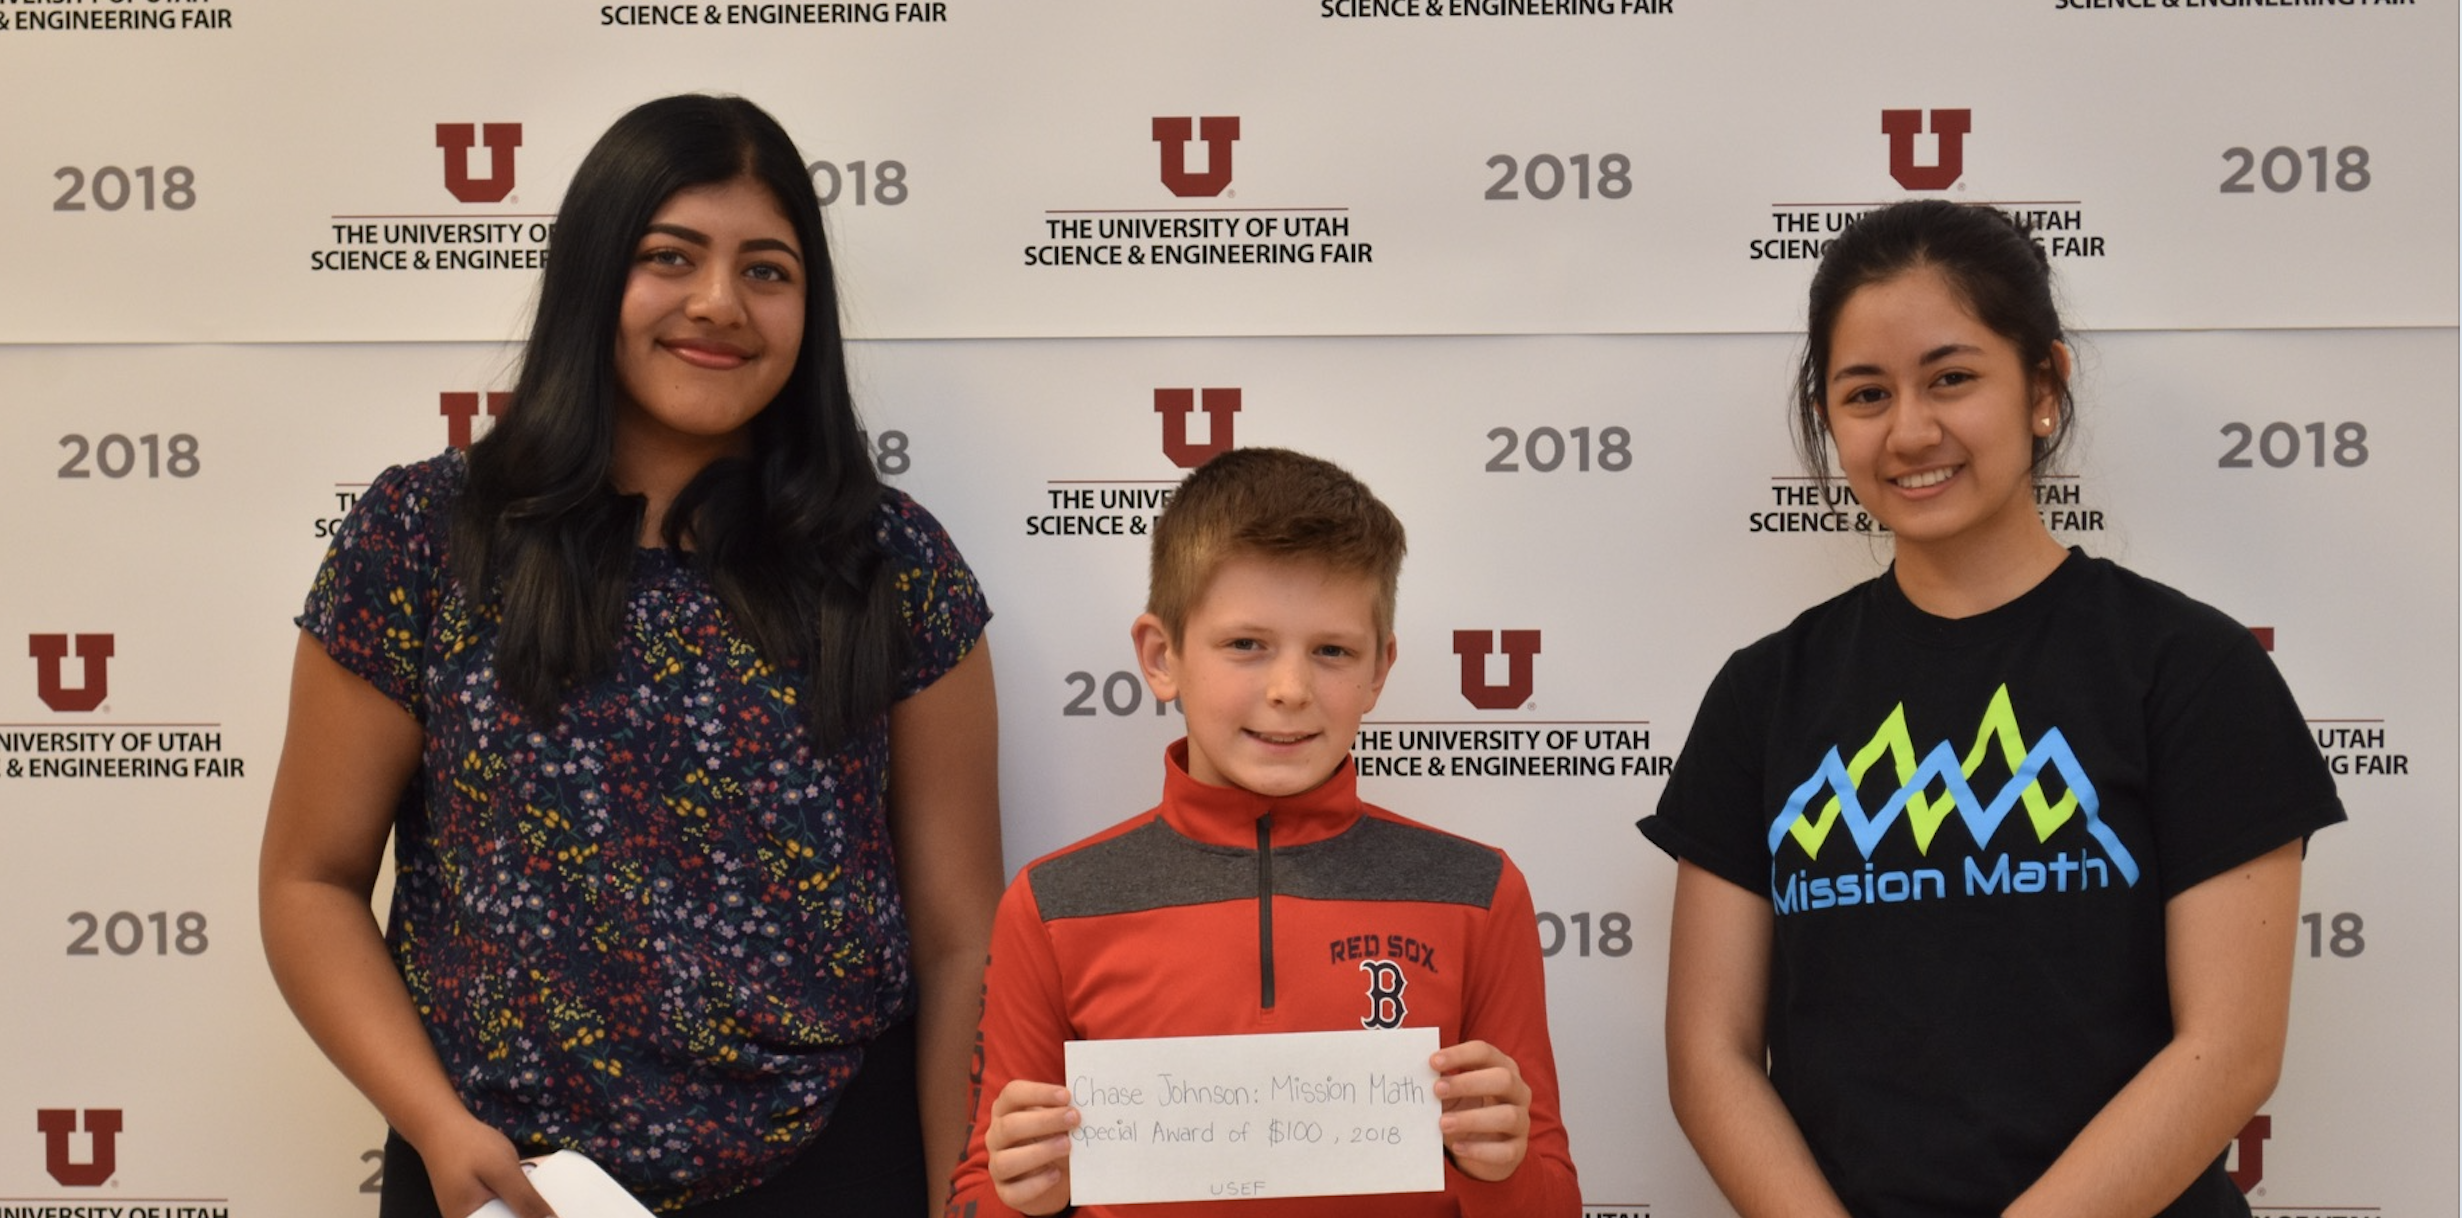 Mission Math at the University of Utah Science and Engineering Fair